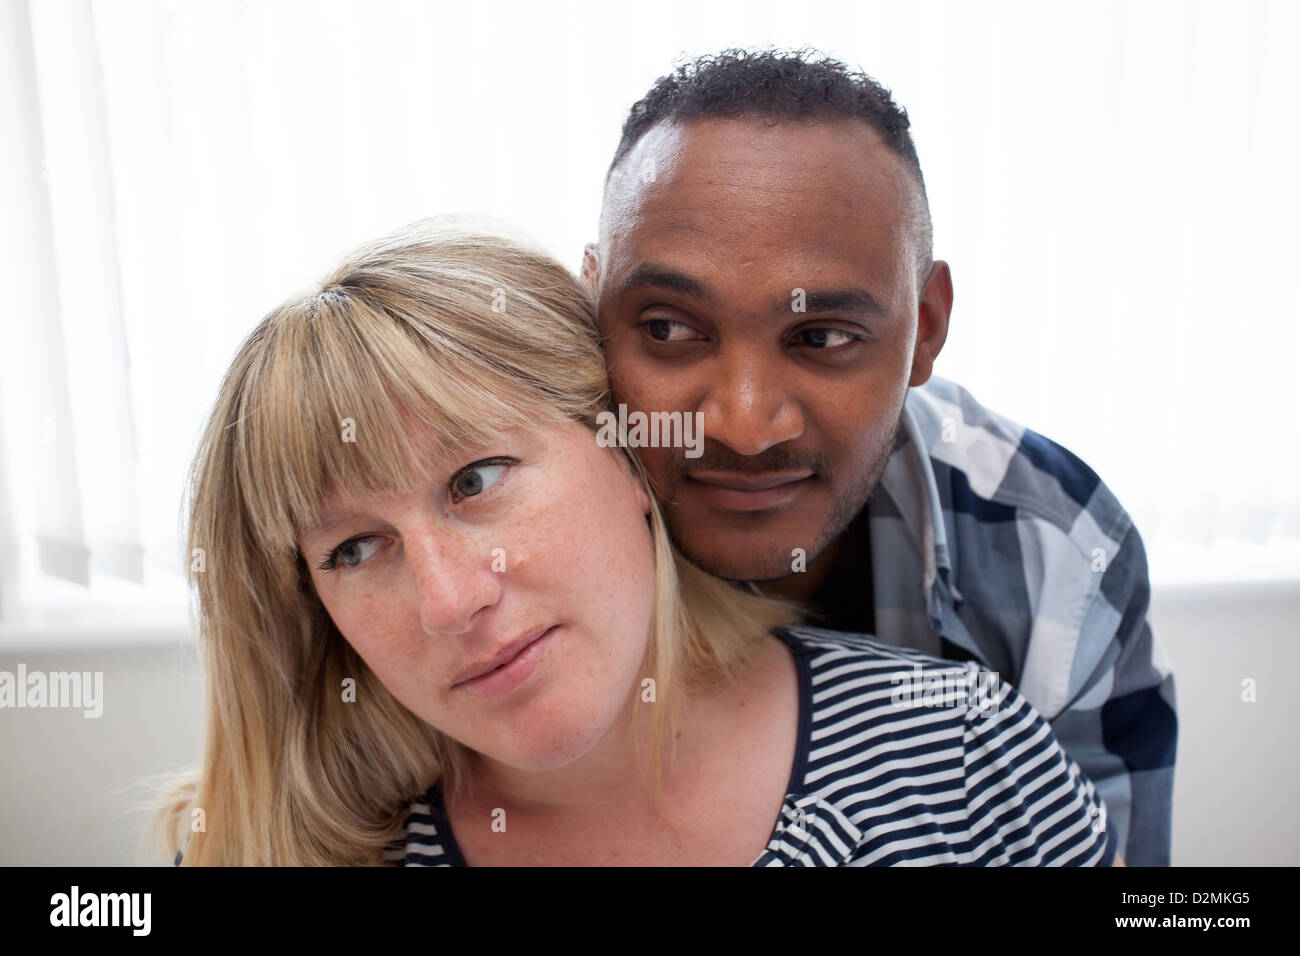 white female black male close heads thoughtful expressions Stock Photo